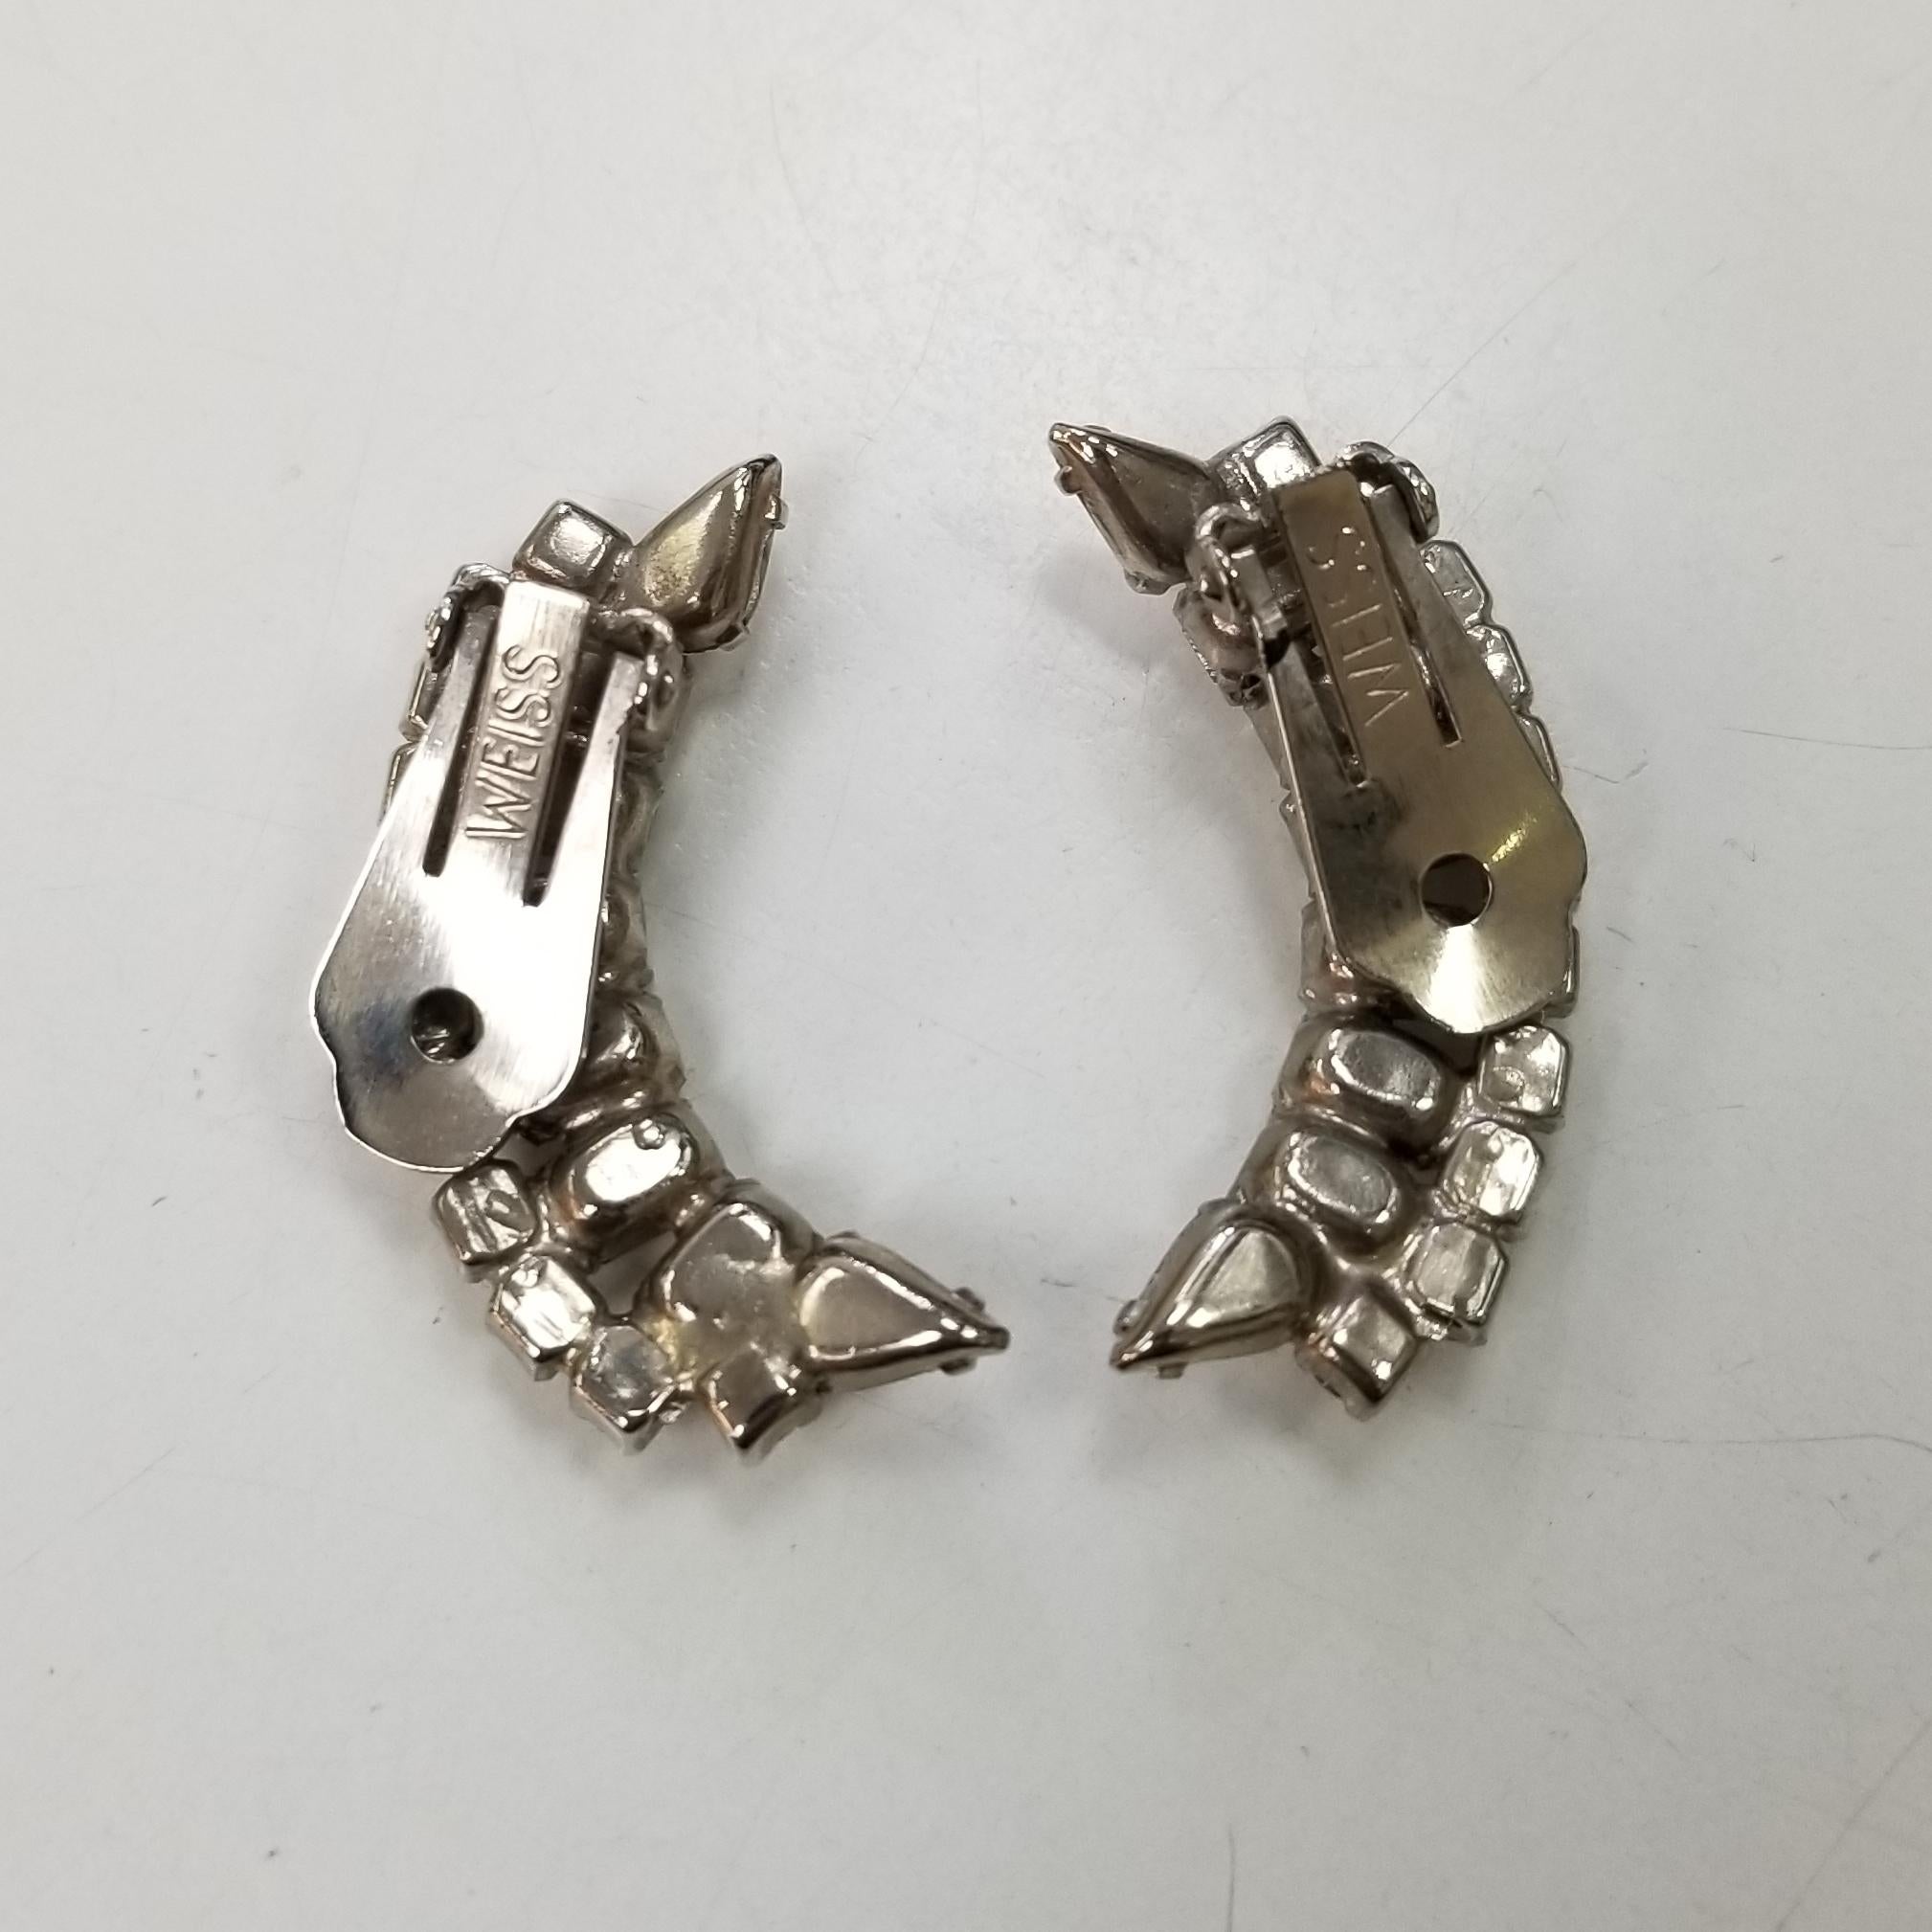 Vintage Weiss,1950s clear rhinestone earring.  The multi-cut rhinestones are configured in an abstract shape and are set in a silver-washed metal.